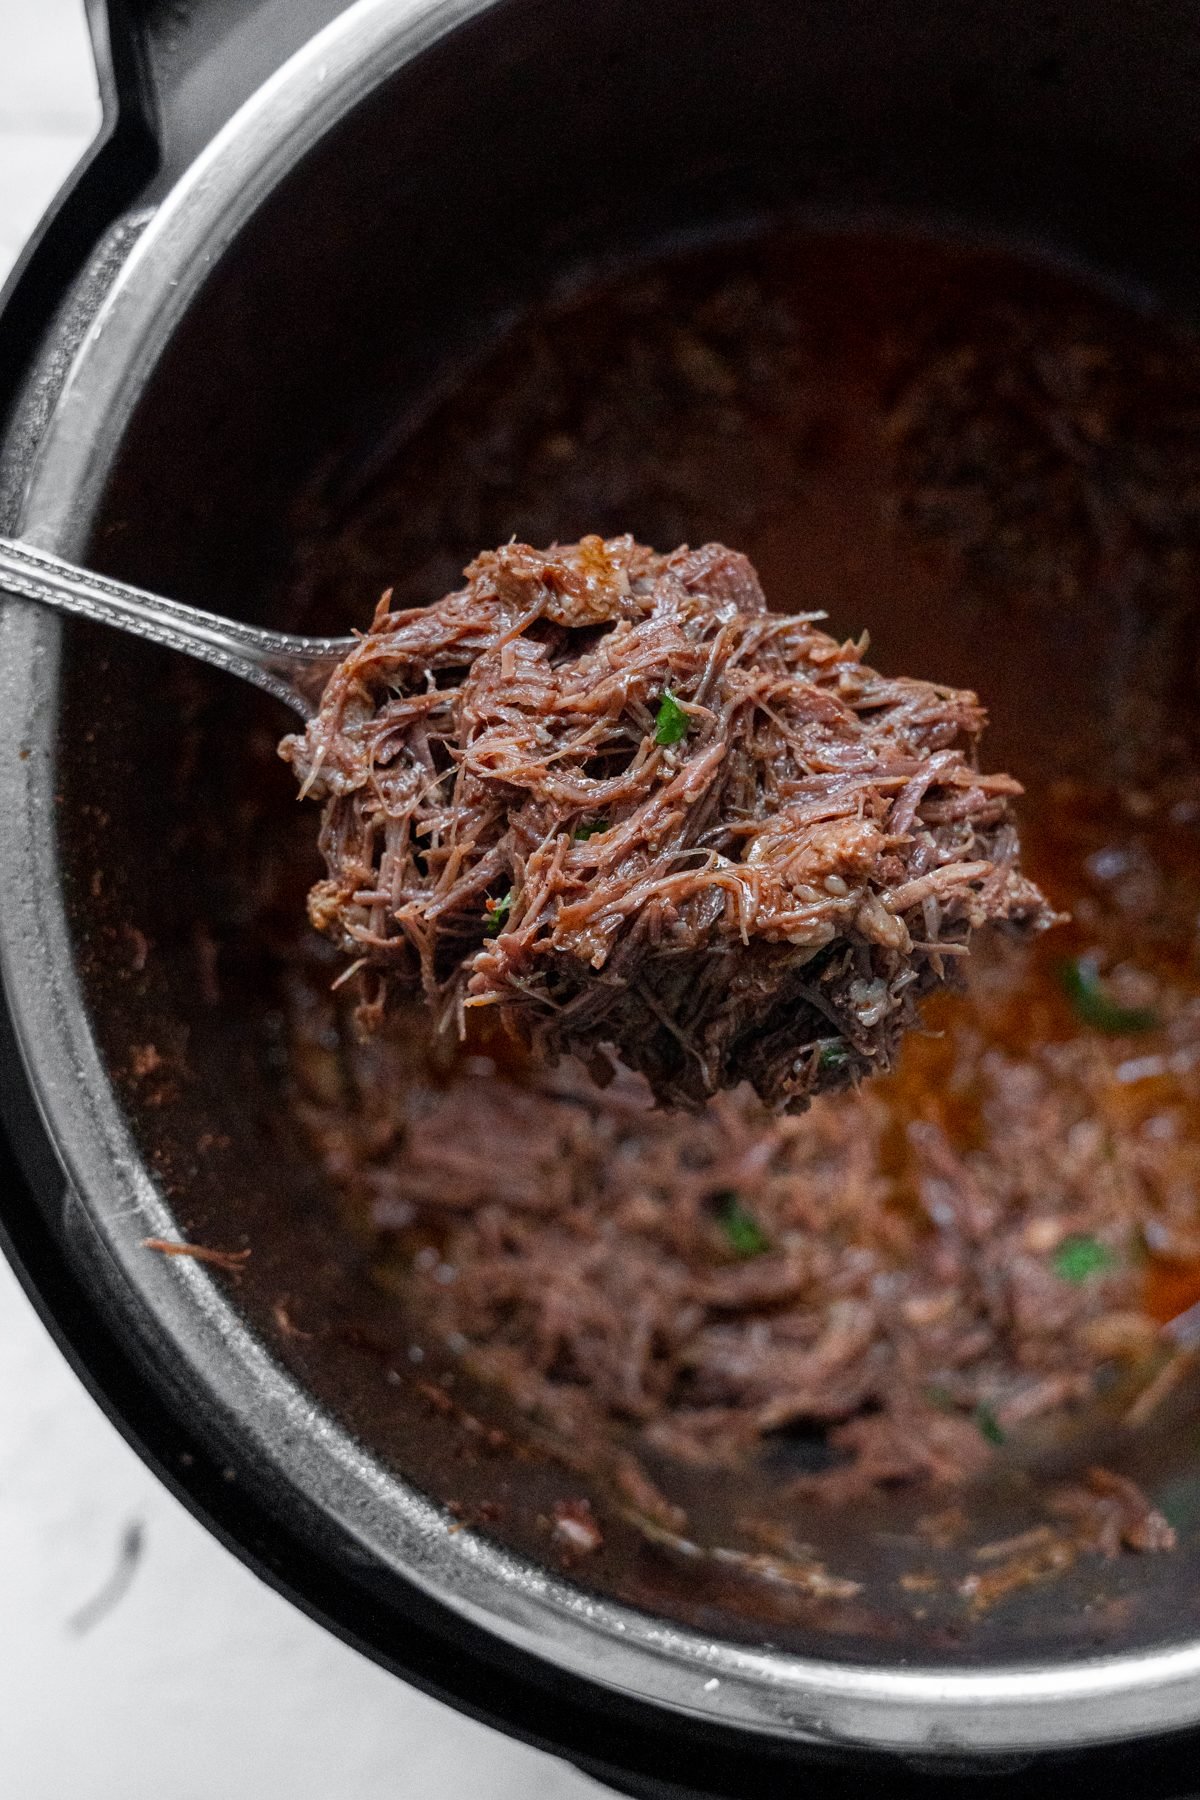 Shredded beef on a spoon.